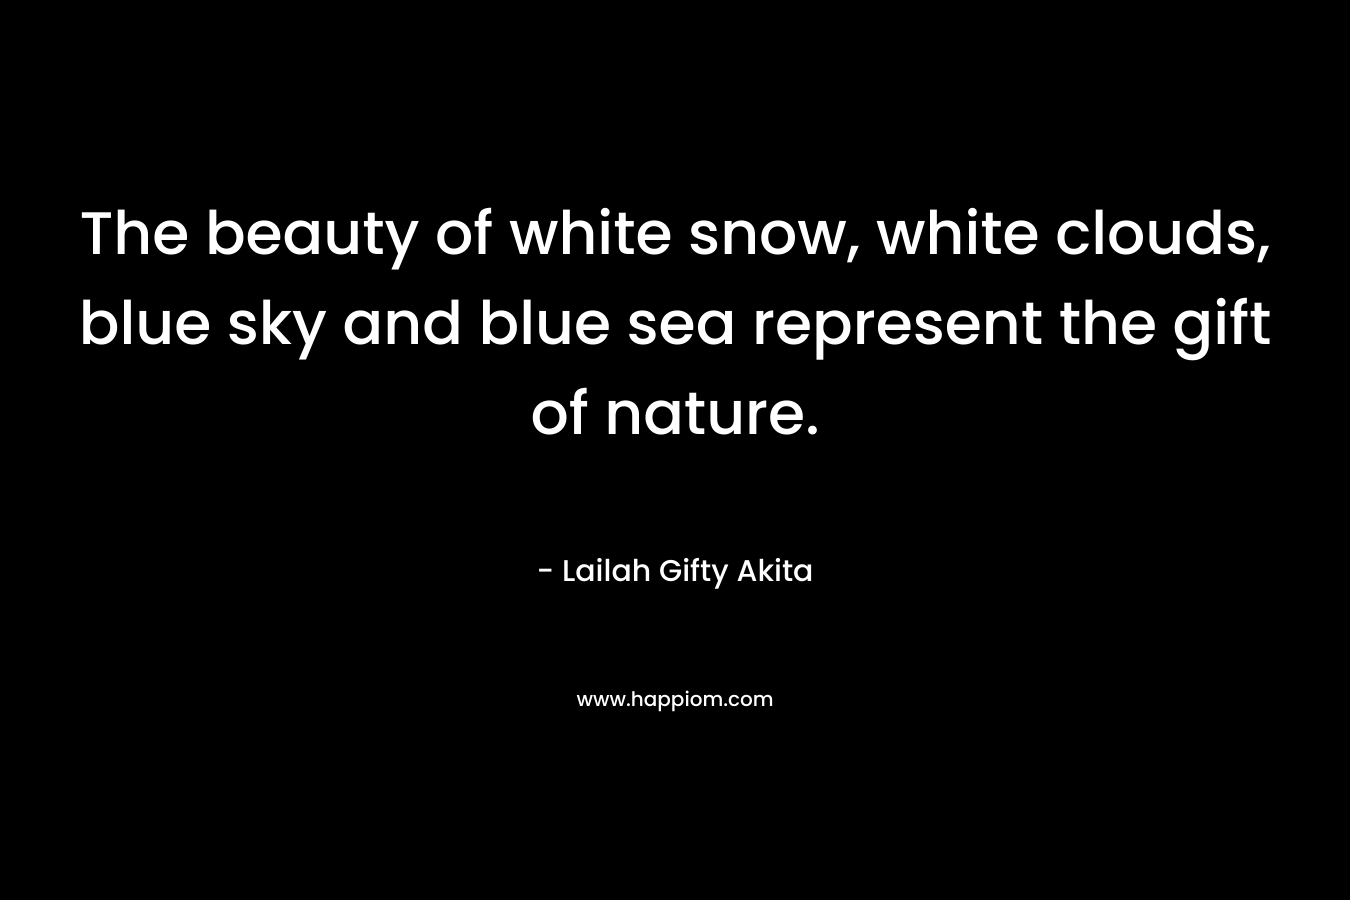 The beauty of white snow, white clouds, blue sky and blue sea represent the gift of nature.